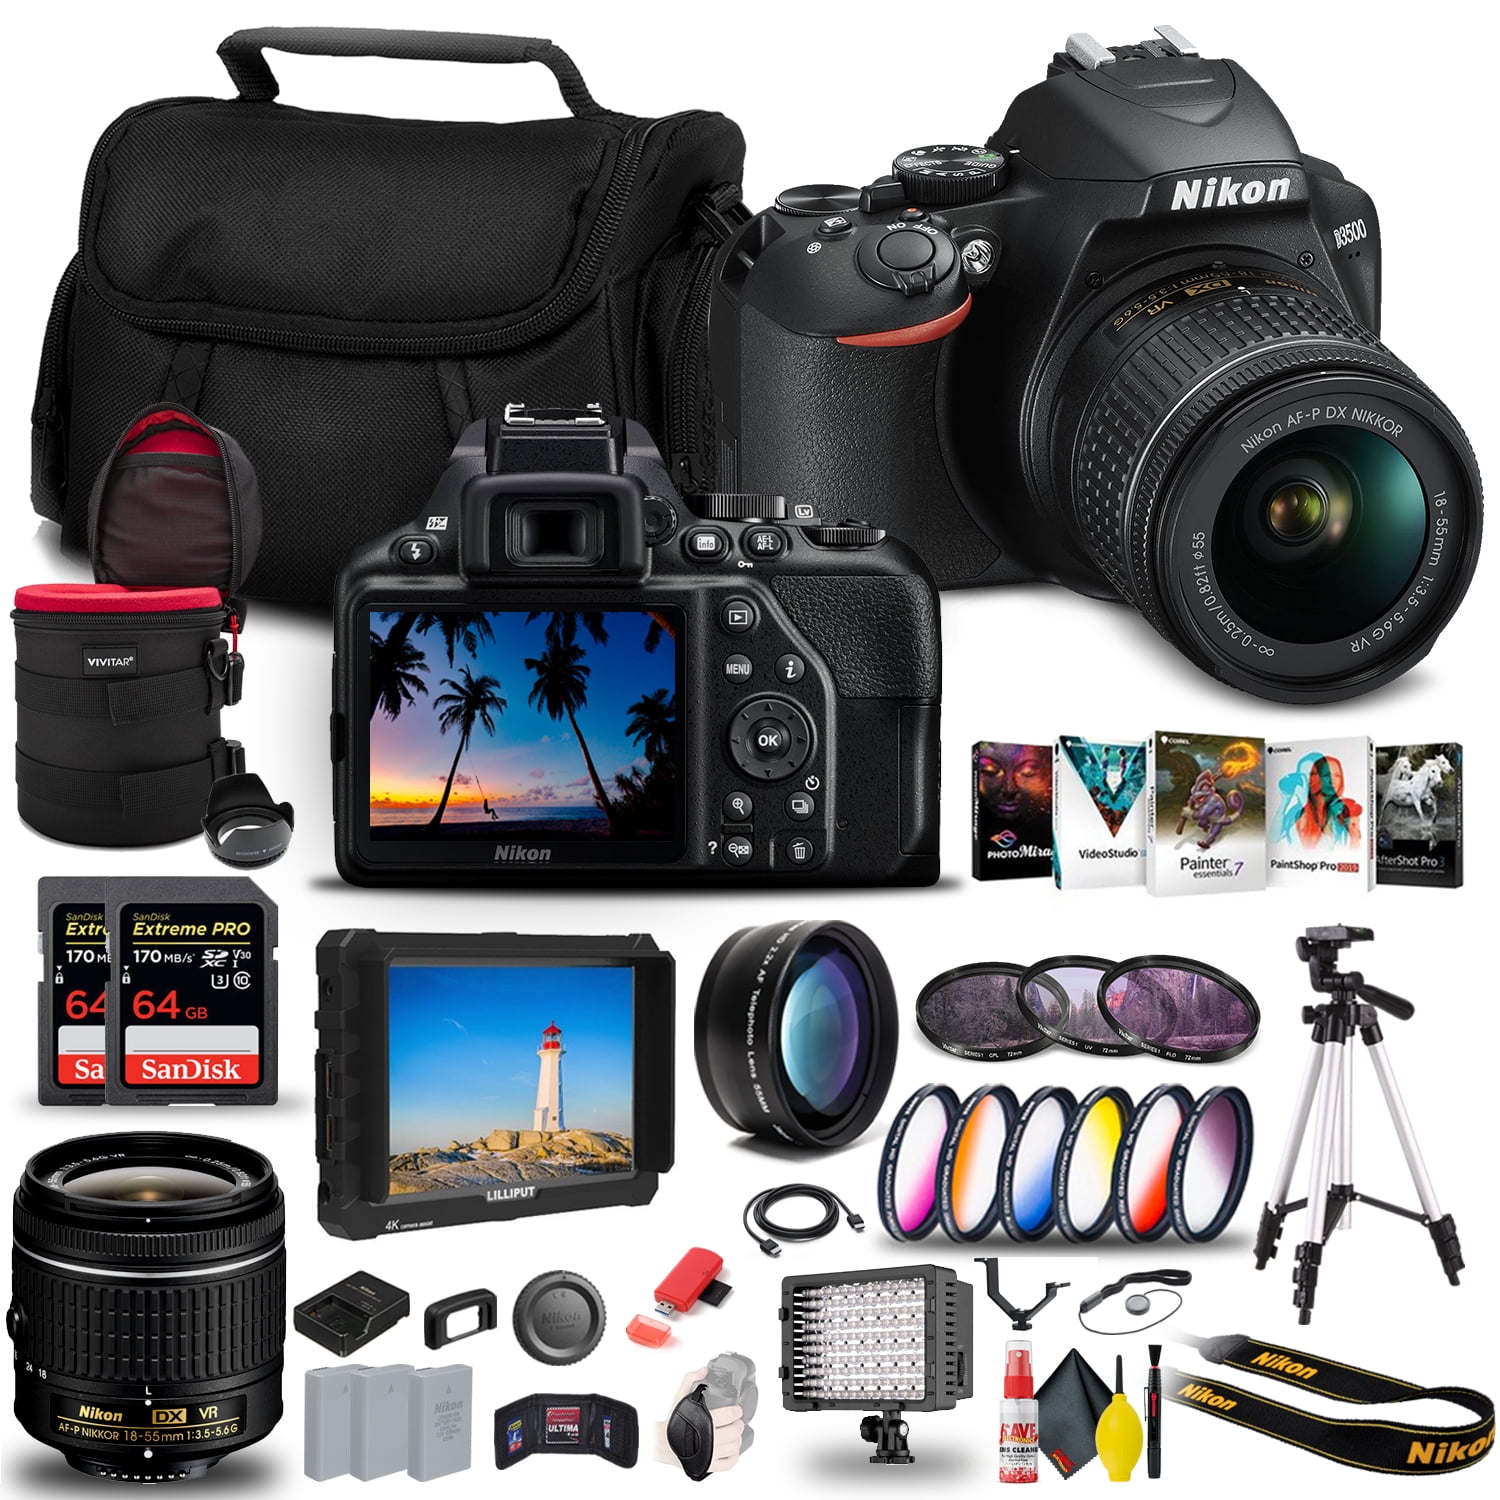 Nikon D3200 DLSR Camera 18-55 VR KIT with Accessories And Protective Bag